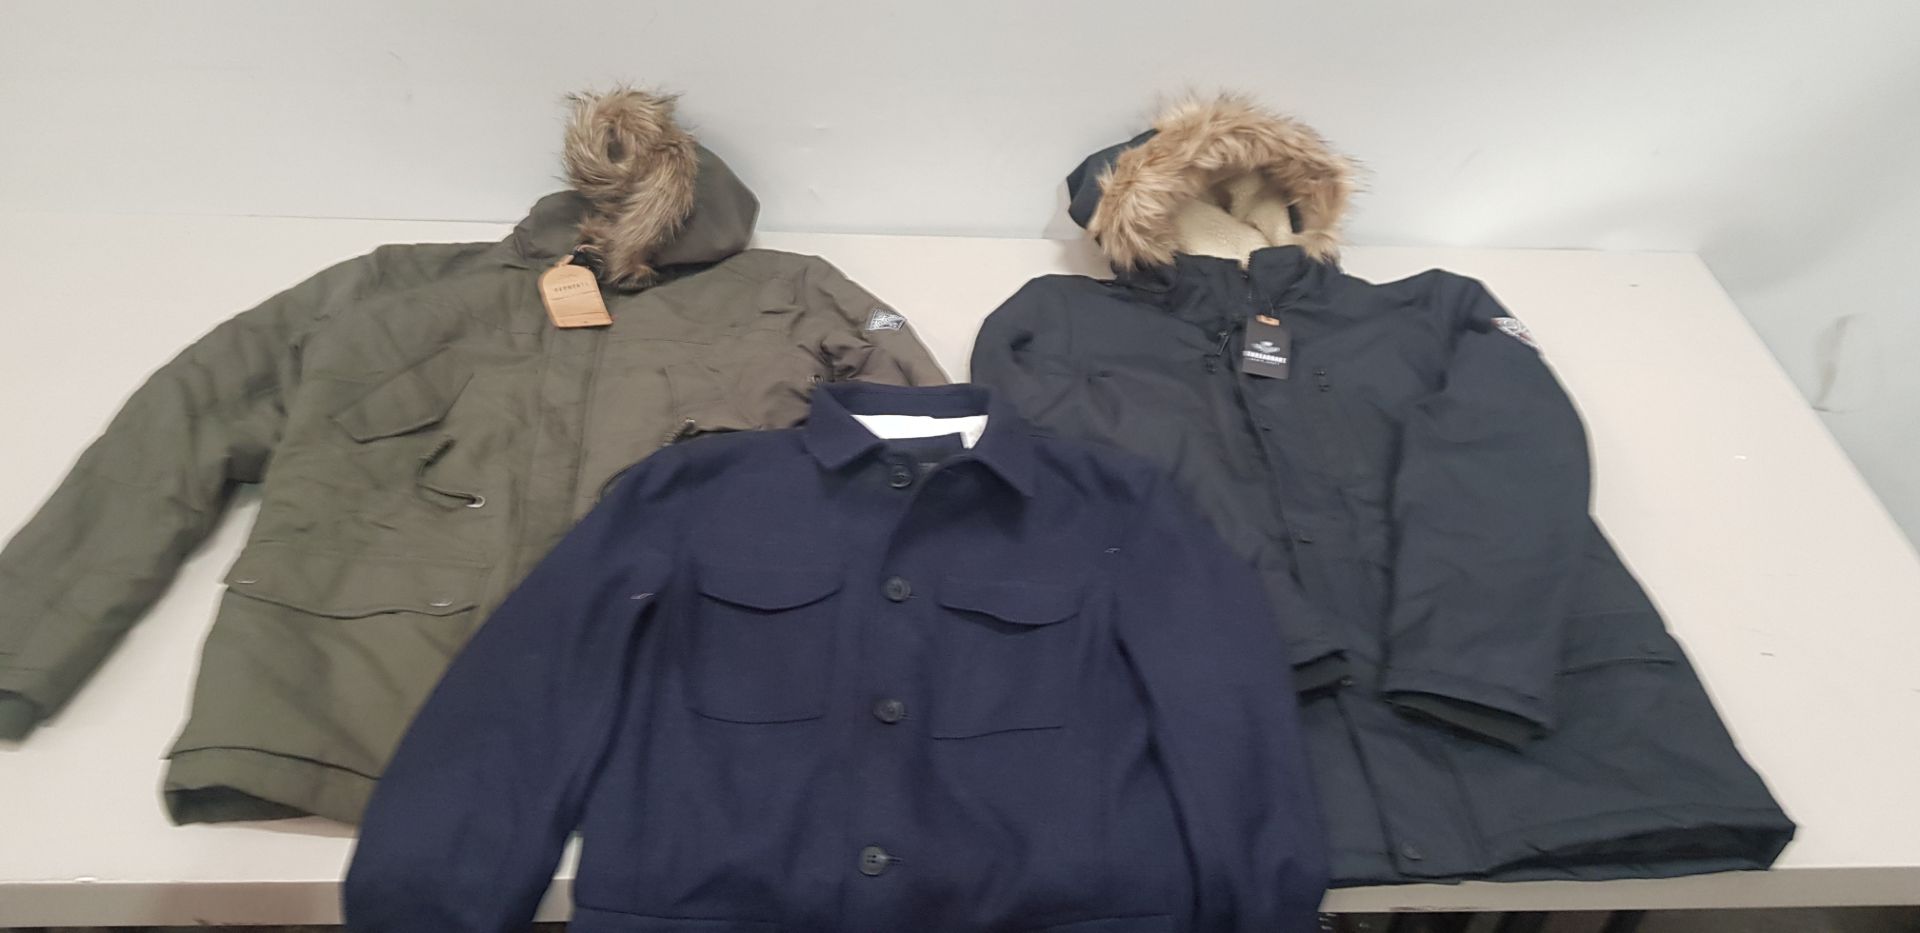 5 X BRAND NEW MIXED THREADBARE JACKETS 2 NAVY BLUE SIZE SMALL , 2 BLACK ONE MEDIUM AND ONE LARGE AND